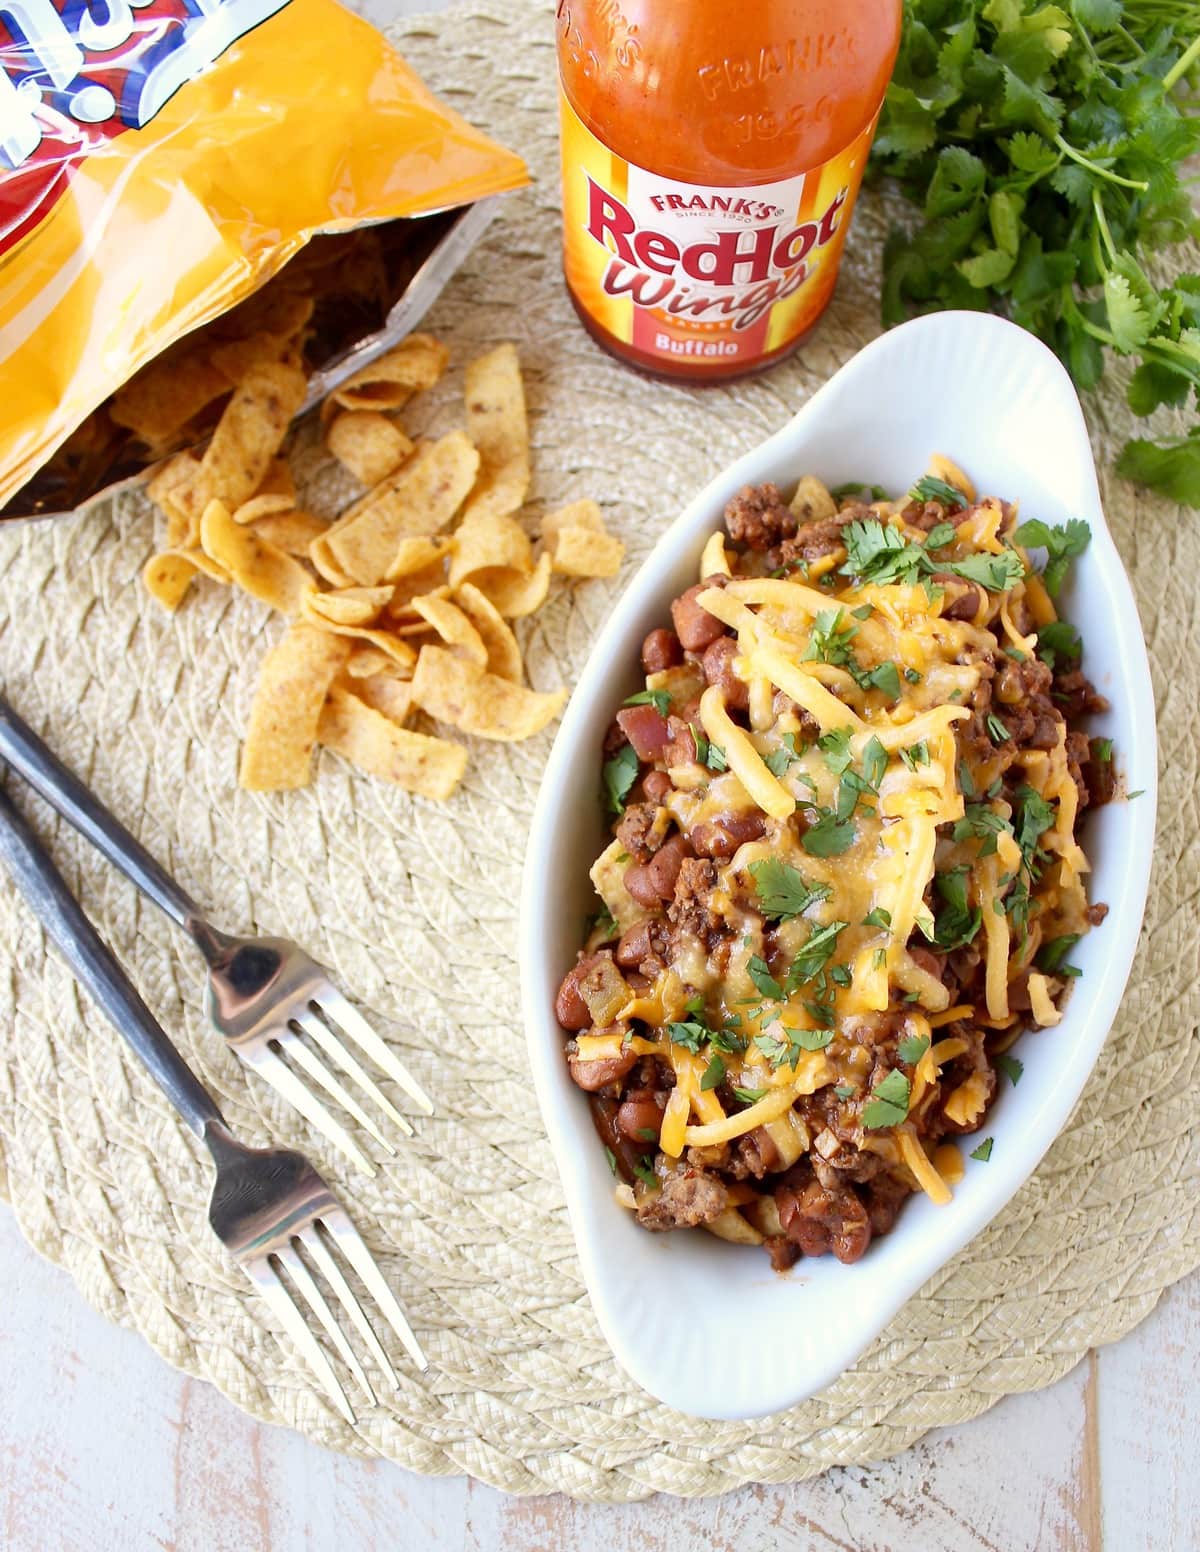 Frito Chili Pie is given a spicy kick with the addition of buffalo sauce, green chilies and spices in this delicious twist on a classic recipe, easy to make in only 20 minutes!